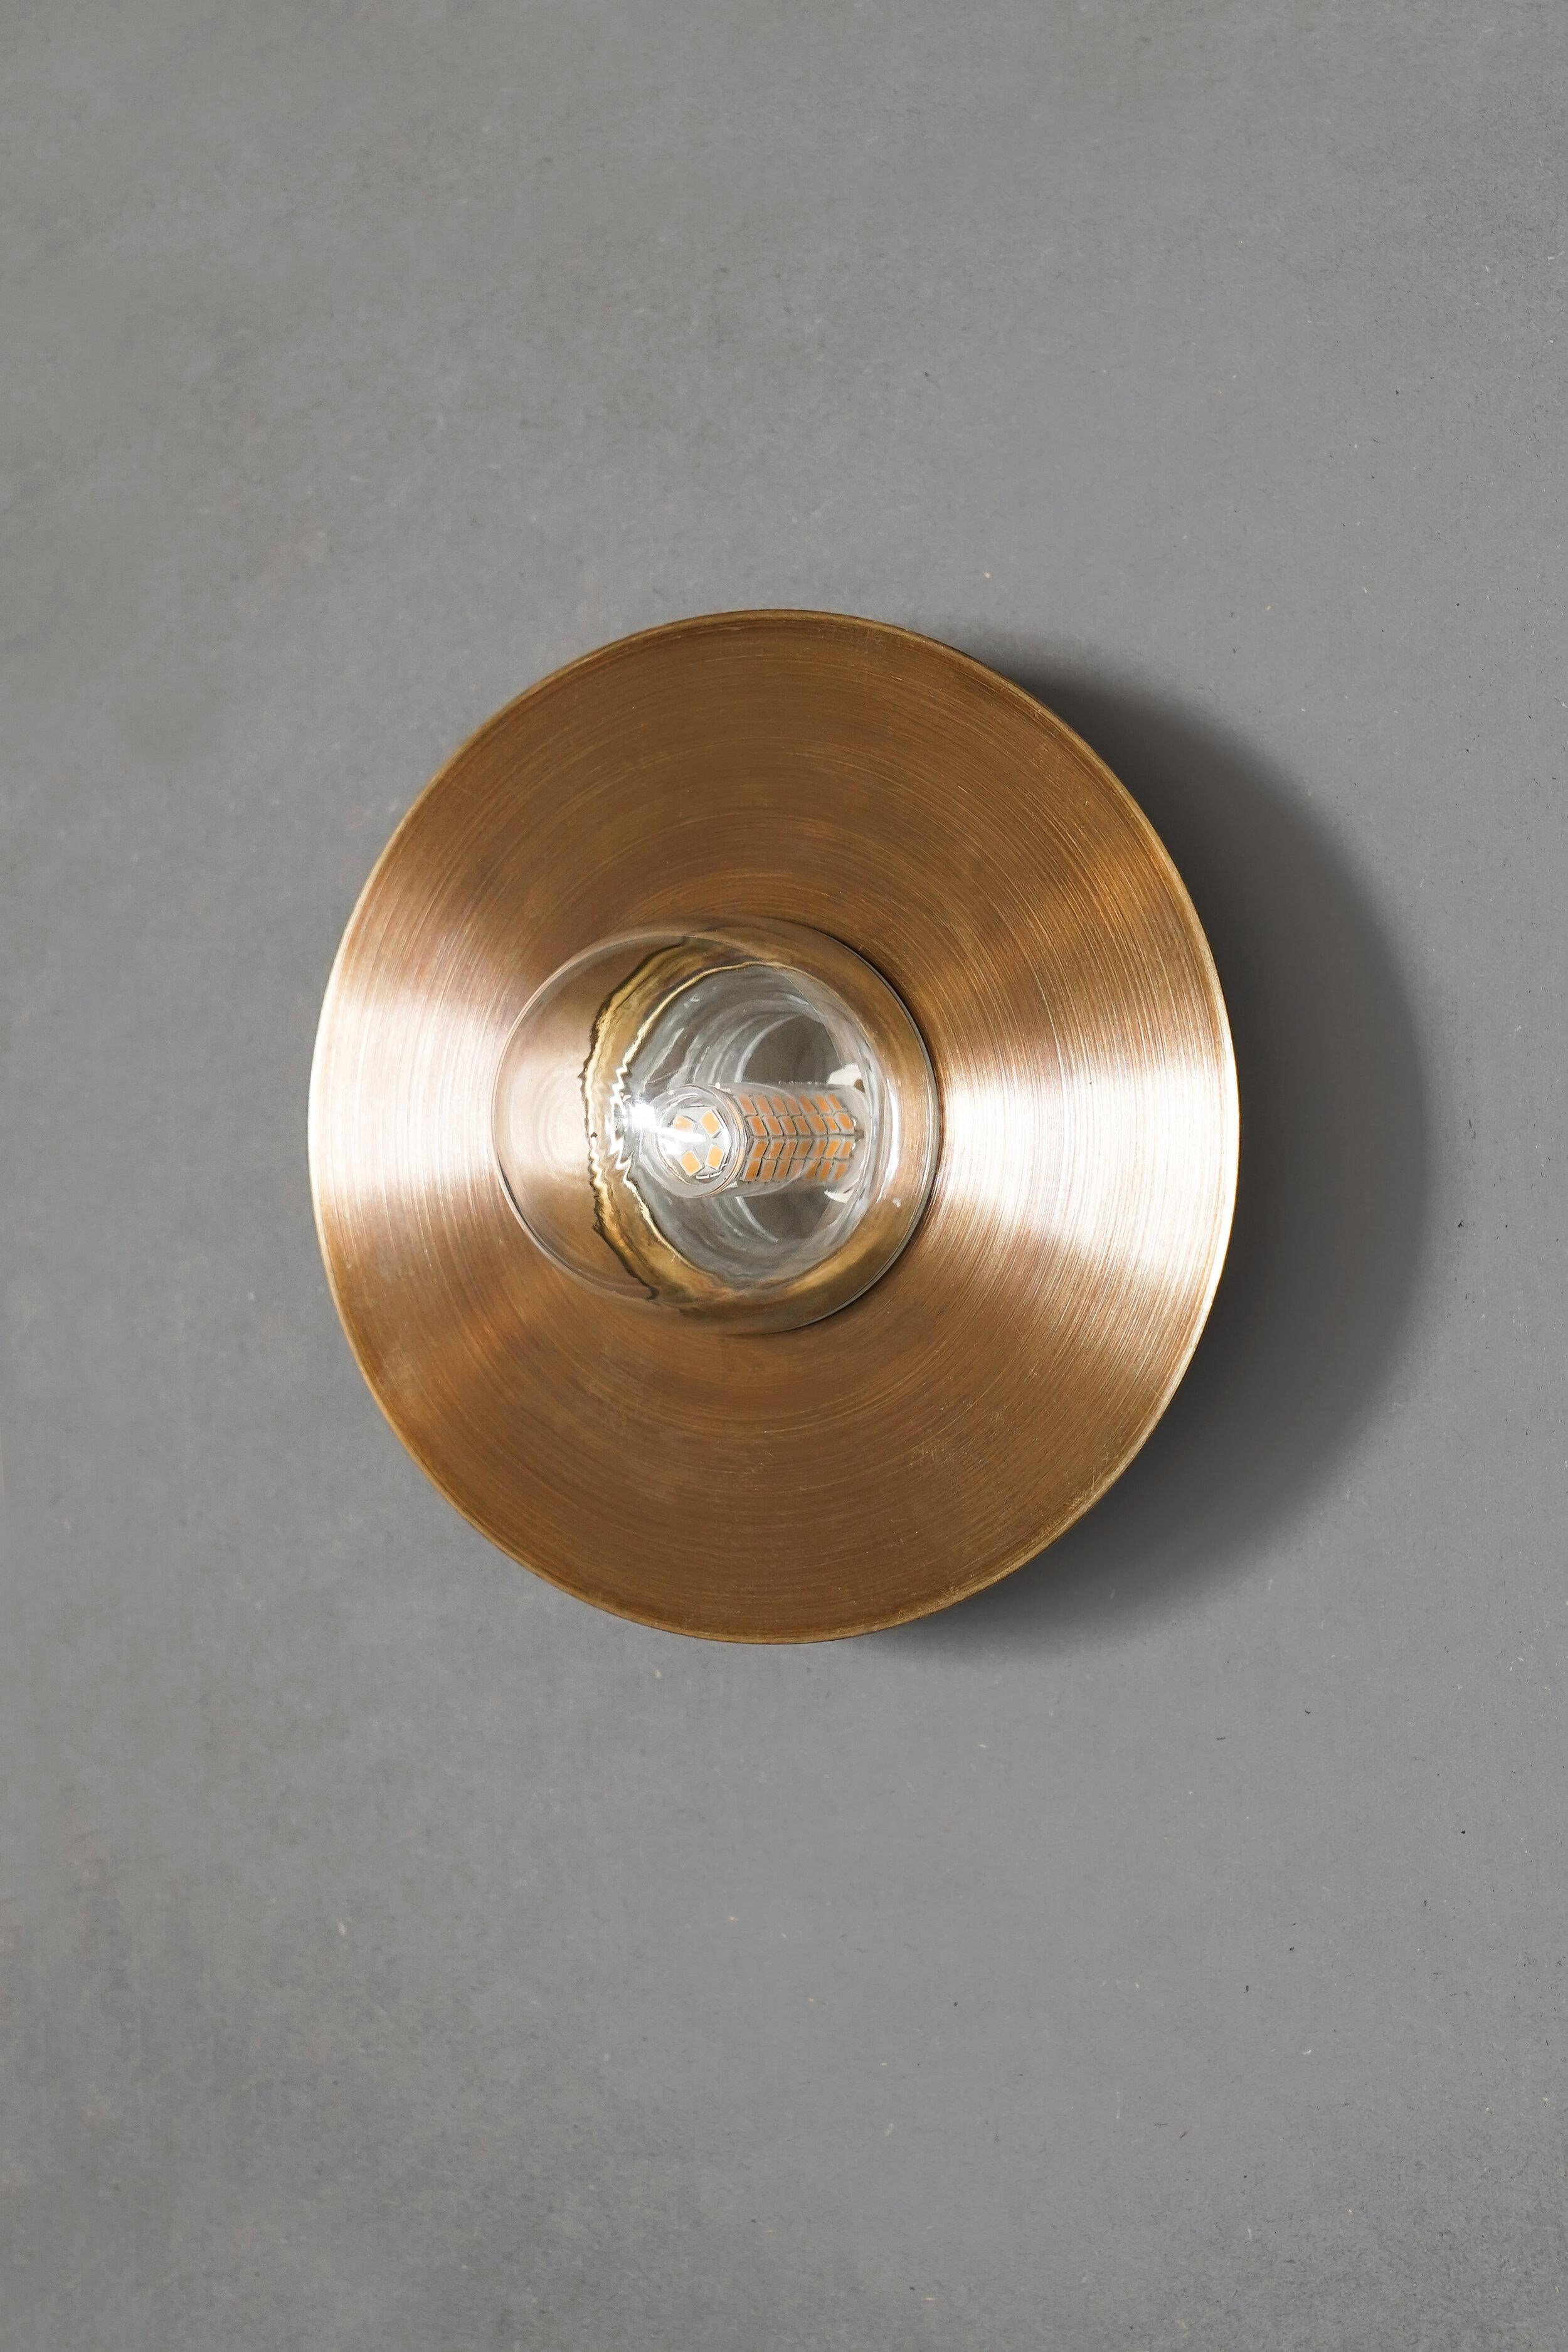 Alba Simple Wall Light XL by Contain
Dimensions: Ø 22 x H9.5 cm 
Materials: brass, 3D printed PLA structure and optical lens.

Also available in different finishes and dimensions (15 cm Ø x 15 cm Ø x 9,5 cm and 22 cm Ø x 22 cm Ø x 9,5 cm).